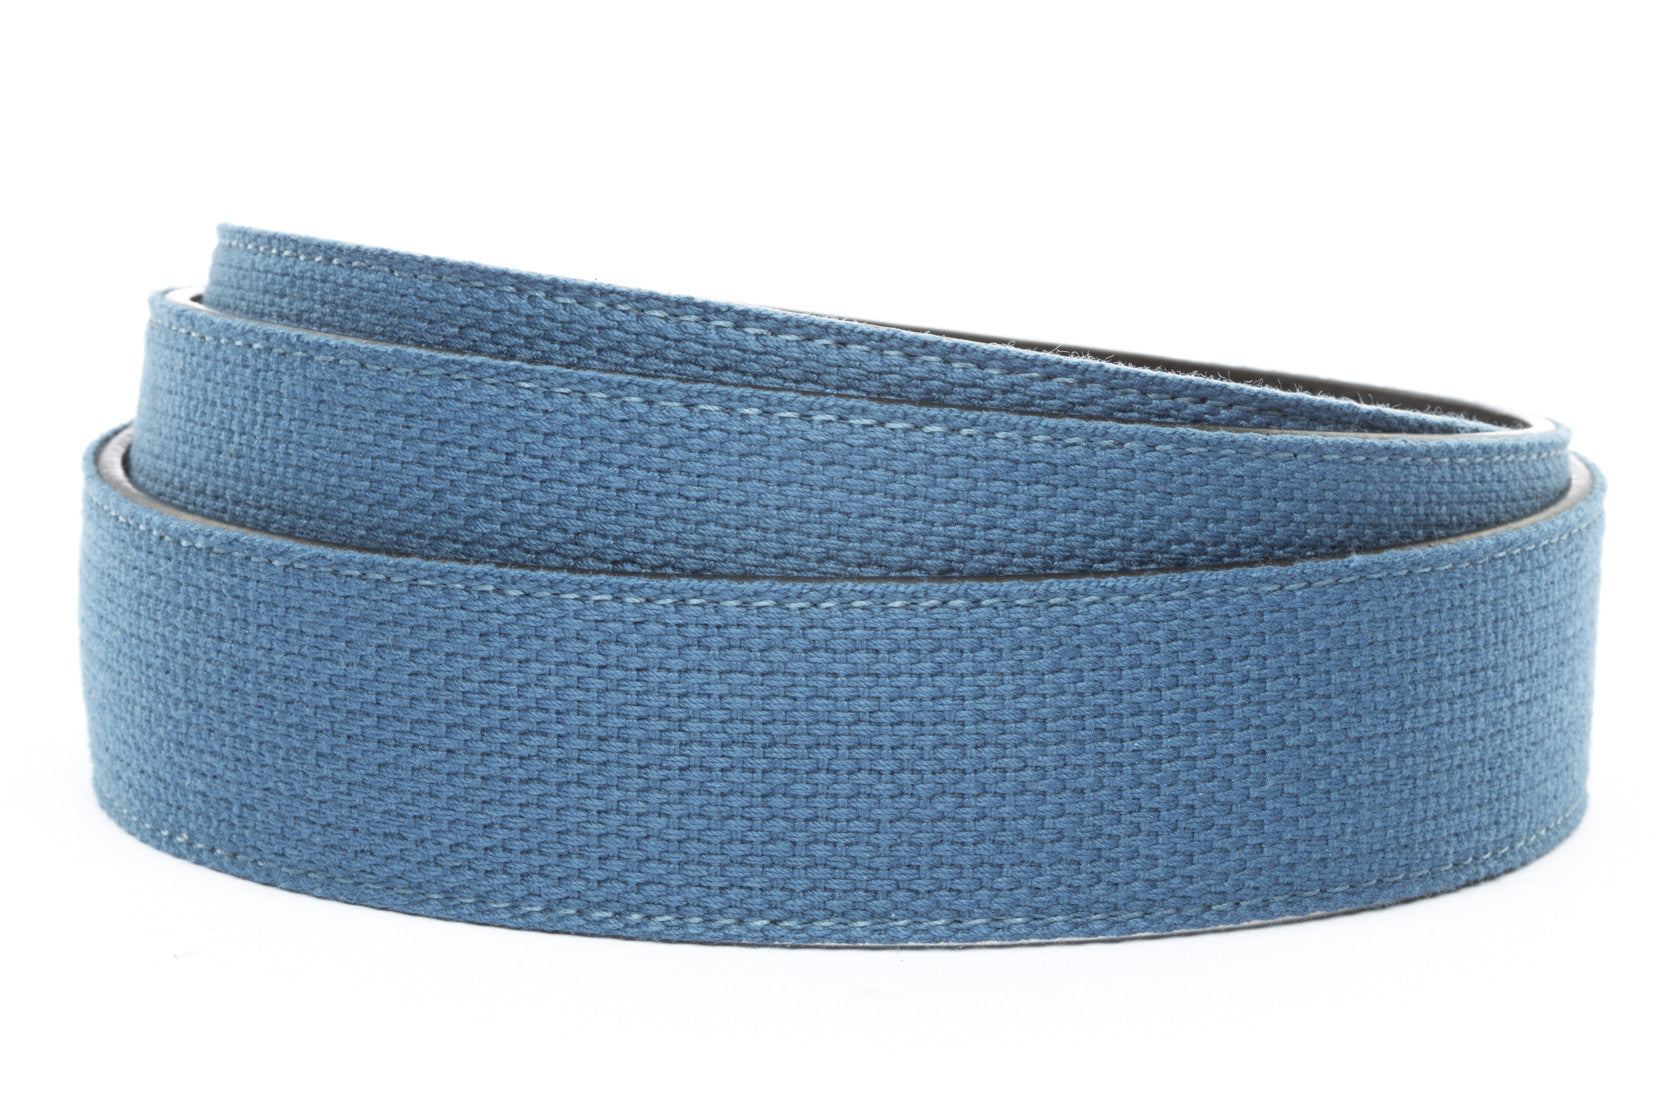 Men's canvas belt strap in marine blue 1.5 inches wide, casual look